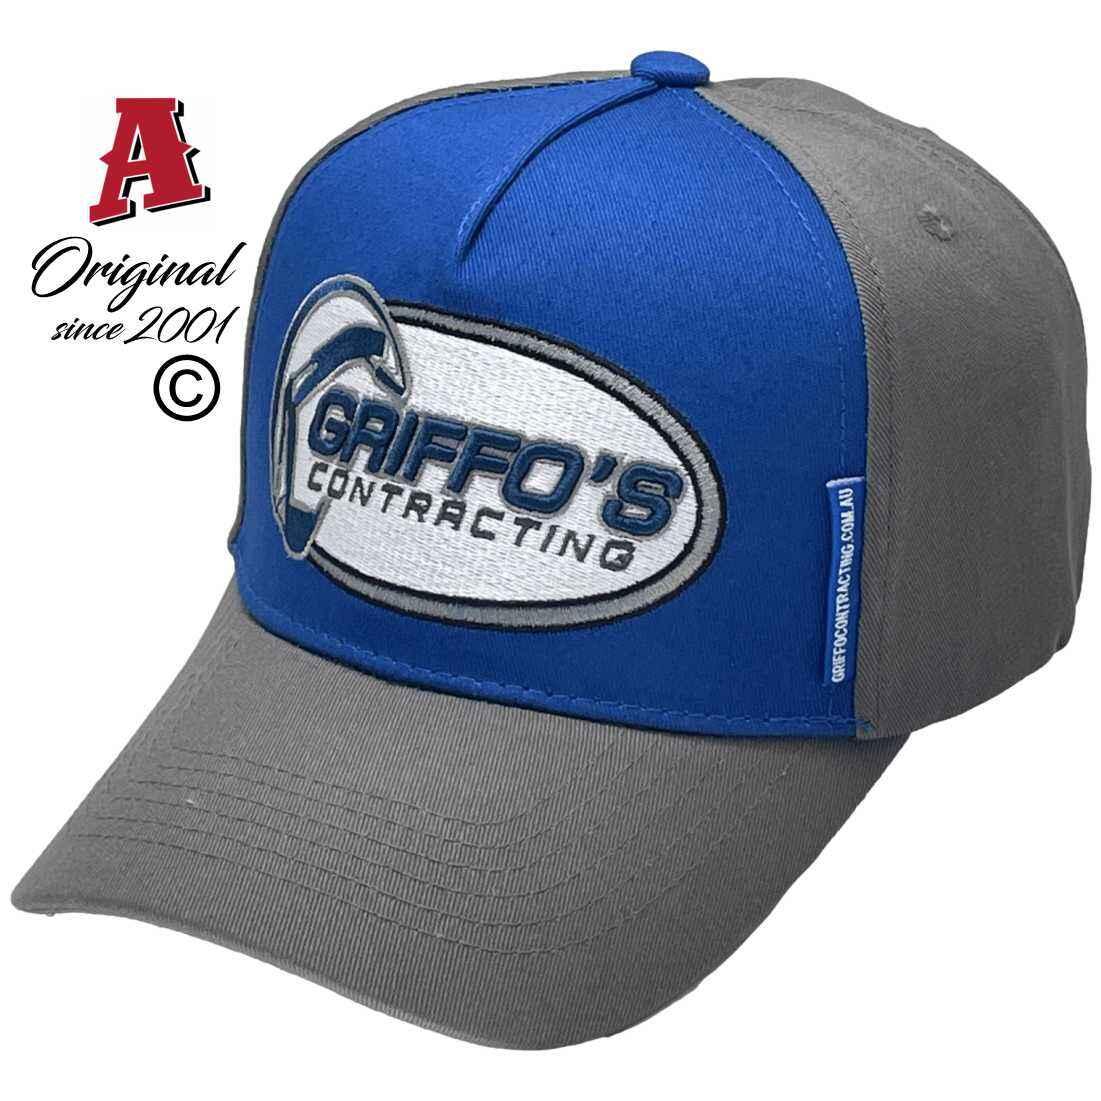 Griffos Contracting Byfield Qld Aussie Snapback Baseball Caps with Australian HeadFit Crown, Grey Royal Blue